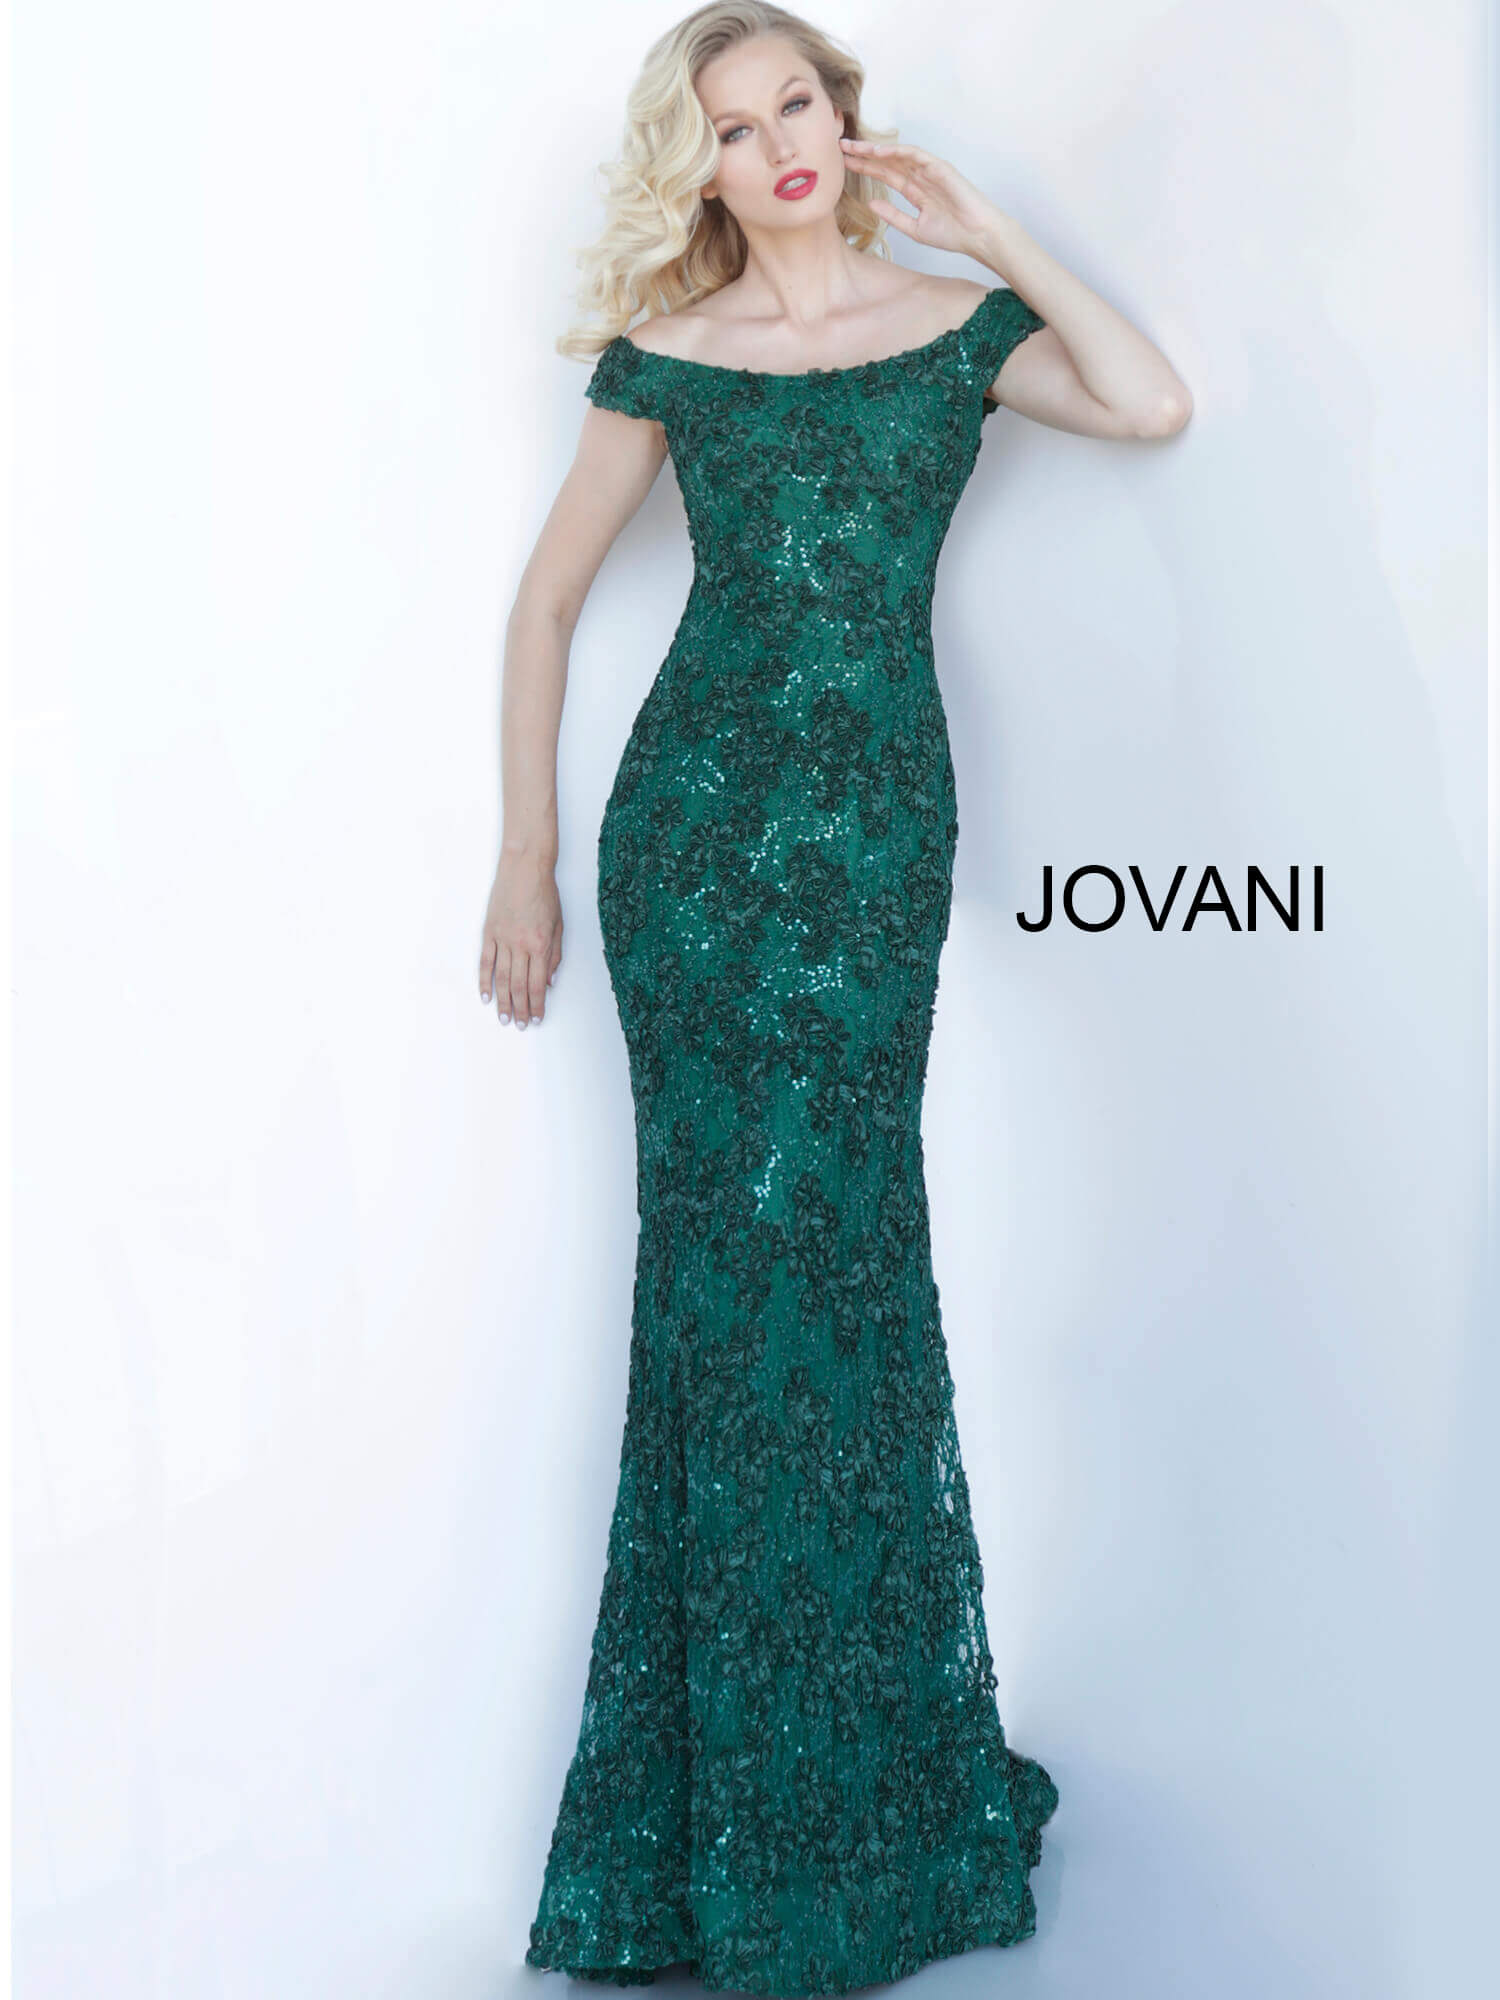 Jovani 1910 Emerald Off the Shoulder Fitted Mother of the Bride Dress